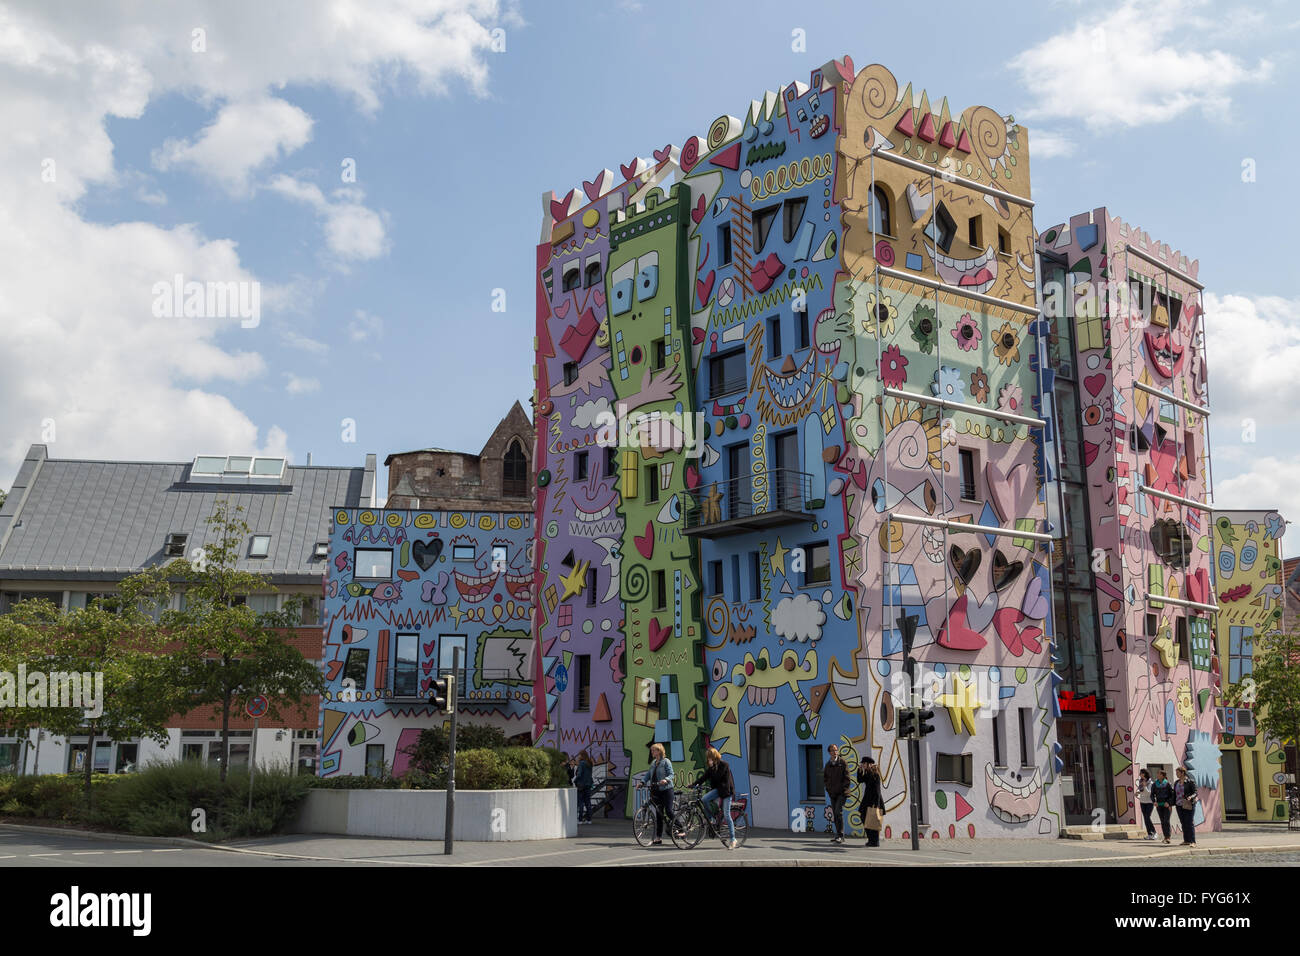 Braunschweig, Germany - August 23, 2014: The Happy Rizzi House by James Rizzi Stock Photo